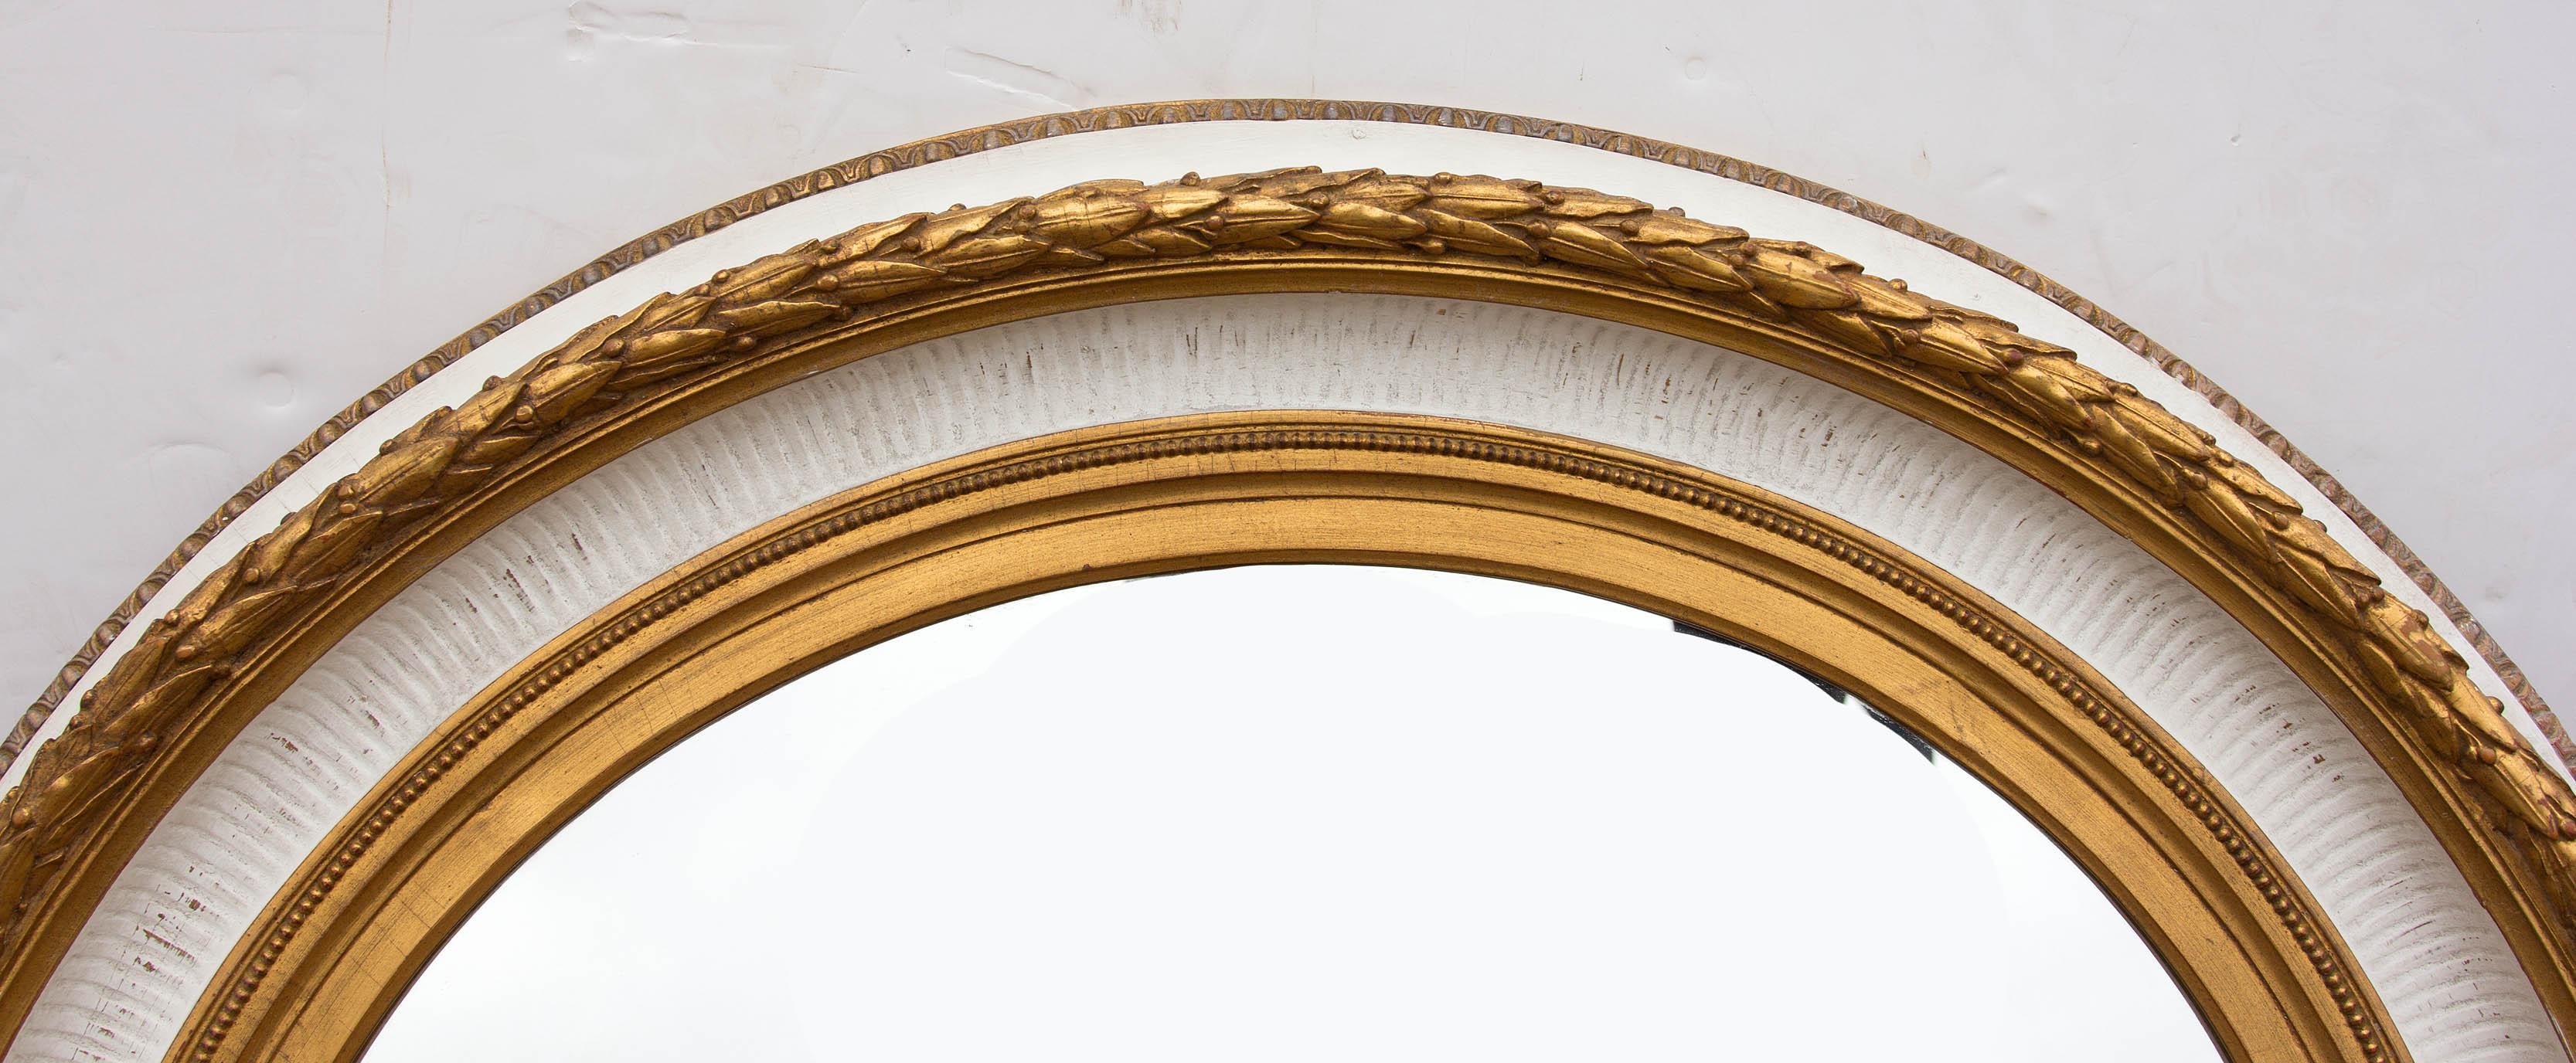 Large 19th century style fluted cove with acanthus border. The mirror is substantial and very high quality. It may be hung horizontal or vertical.